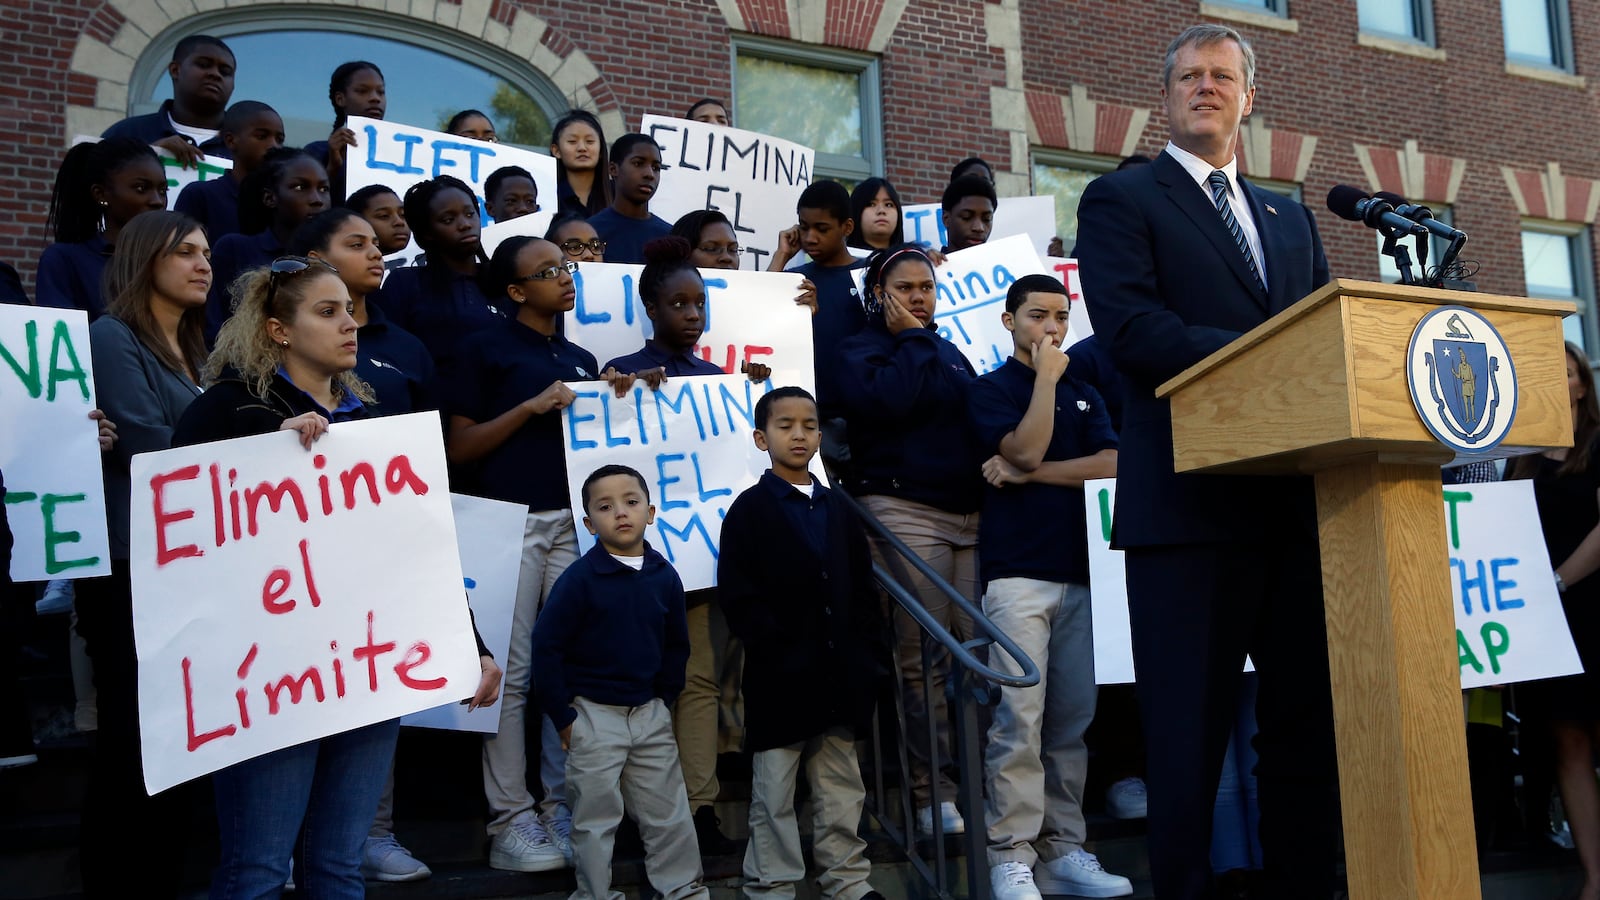 Governor Charlie Baker speaks during an announcement regarding Charter Schools at Brooke Charter School in Boston, Mass. on October 8, 2015.  (Photo by Jessica Rinaldi/The Boston Globe via Getty Images)